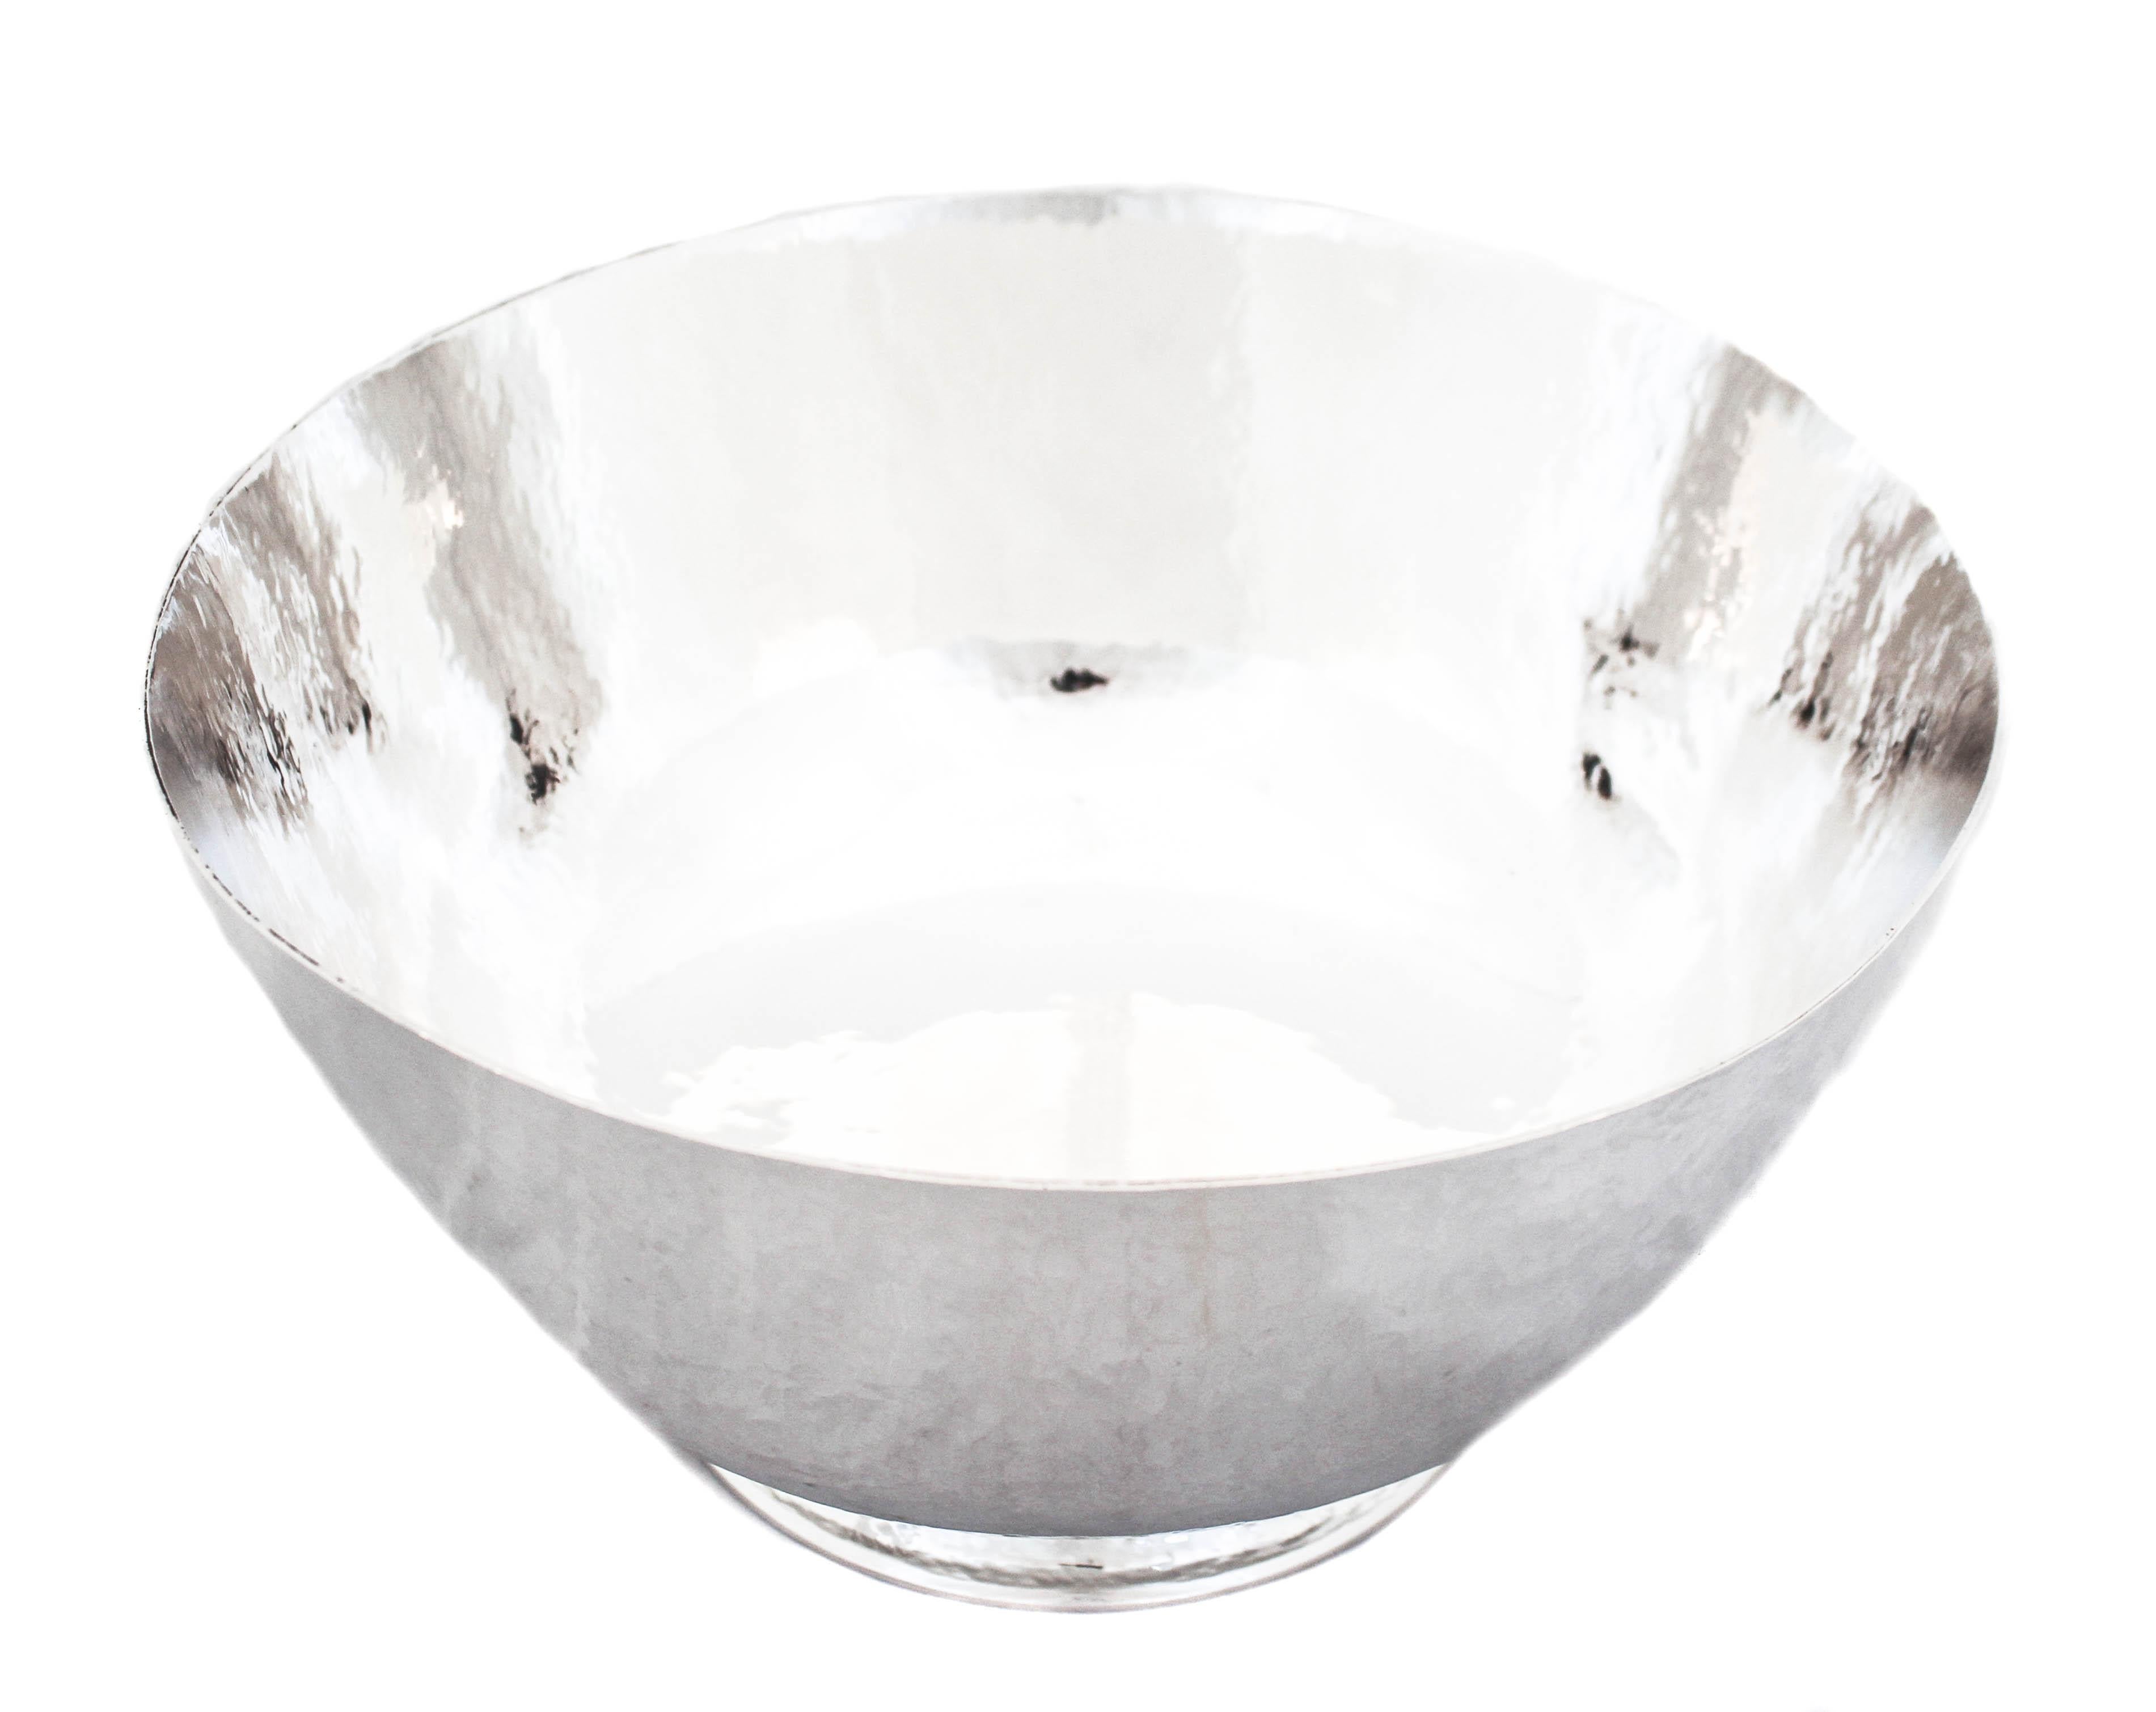 We are delighted to offer you this sterling silver hand hammered bowl by J. C. Boardman & Company of Wallingford Connecticut. This large bowl can definitely be used as a centerpiece. It stands on a pedestal and has a presence. It can even be used as